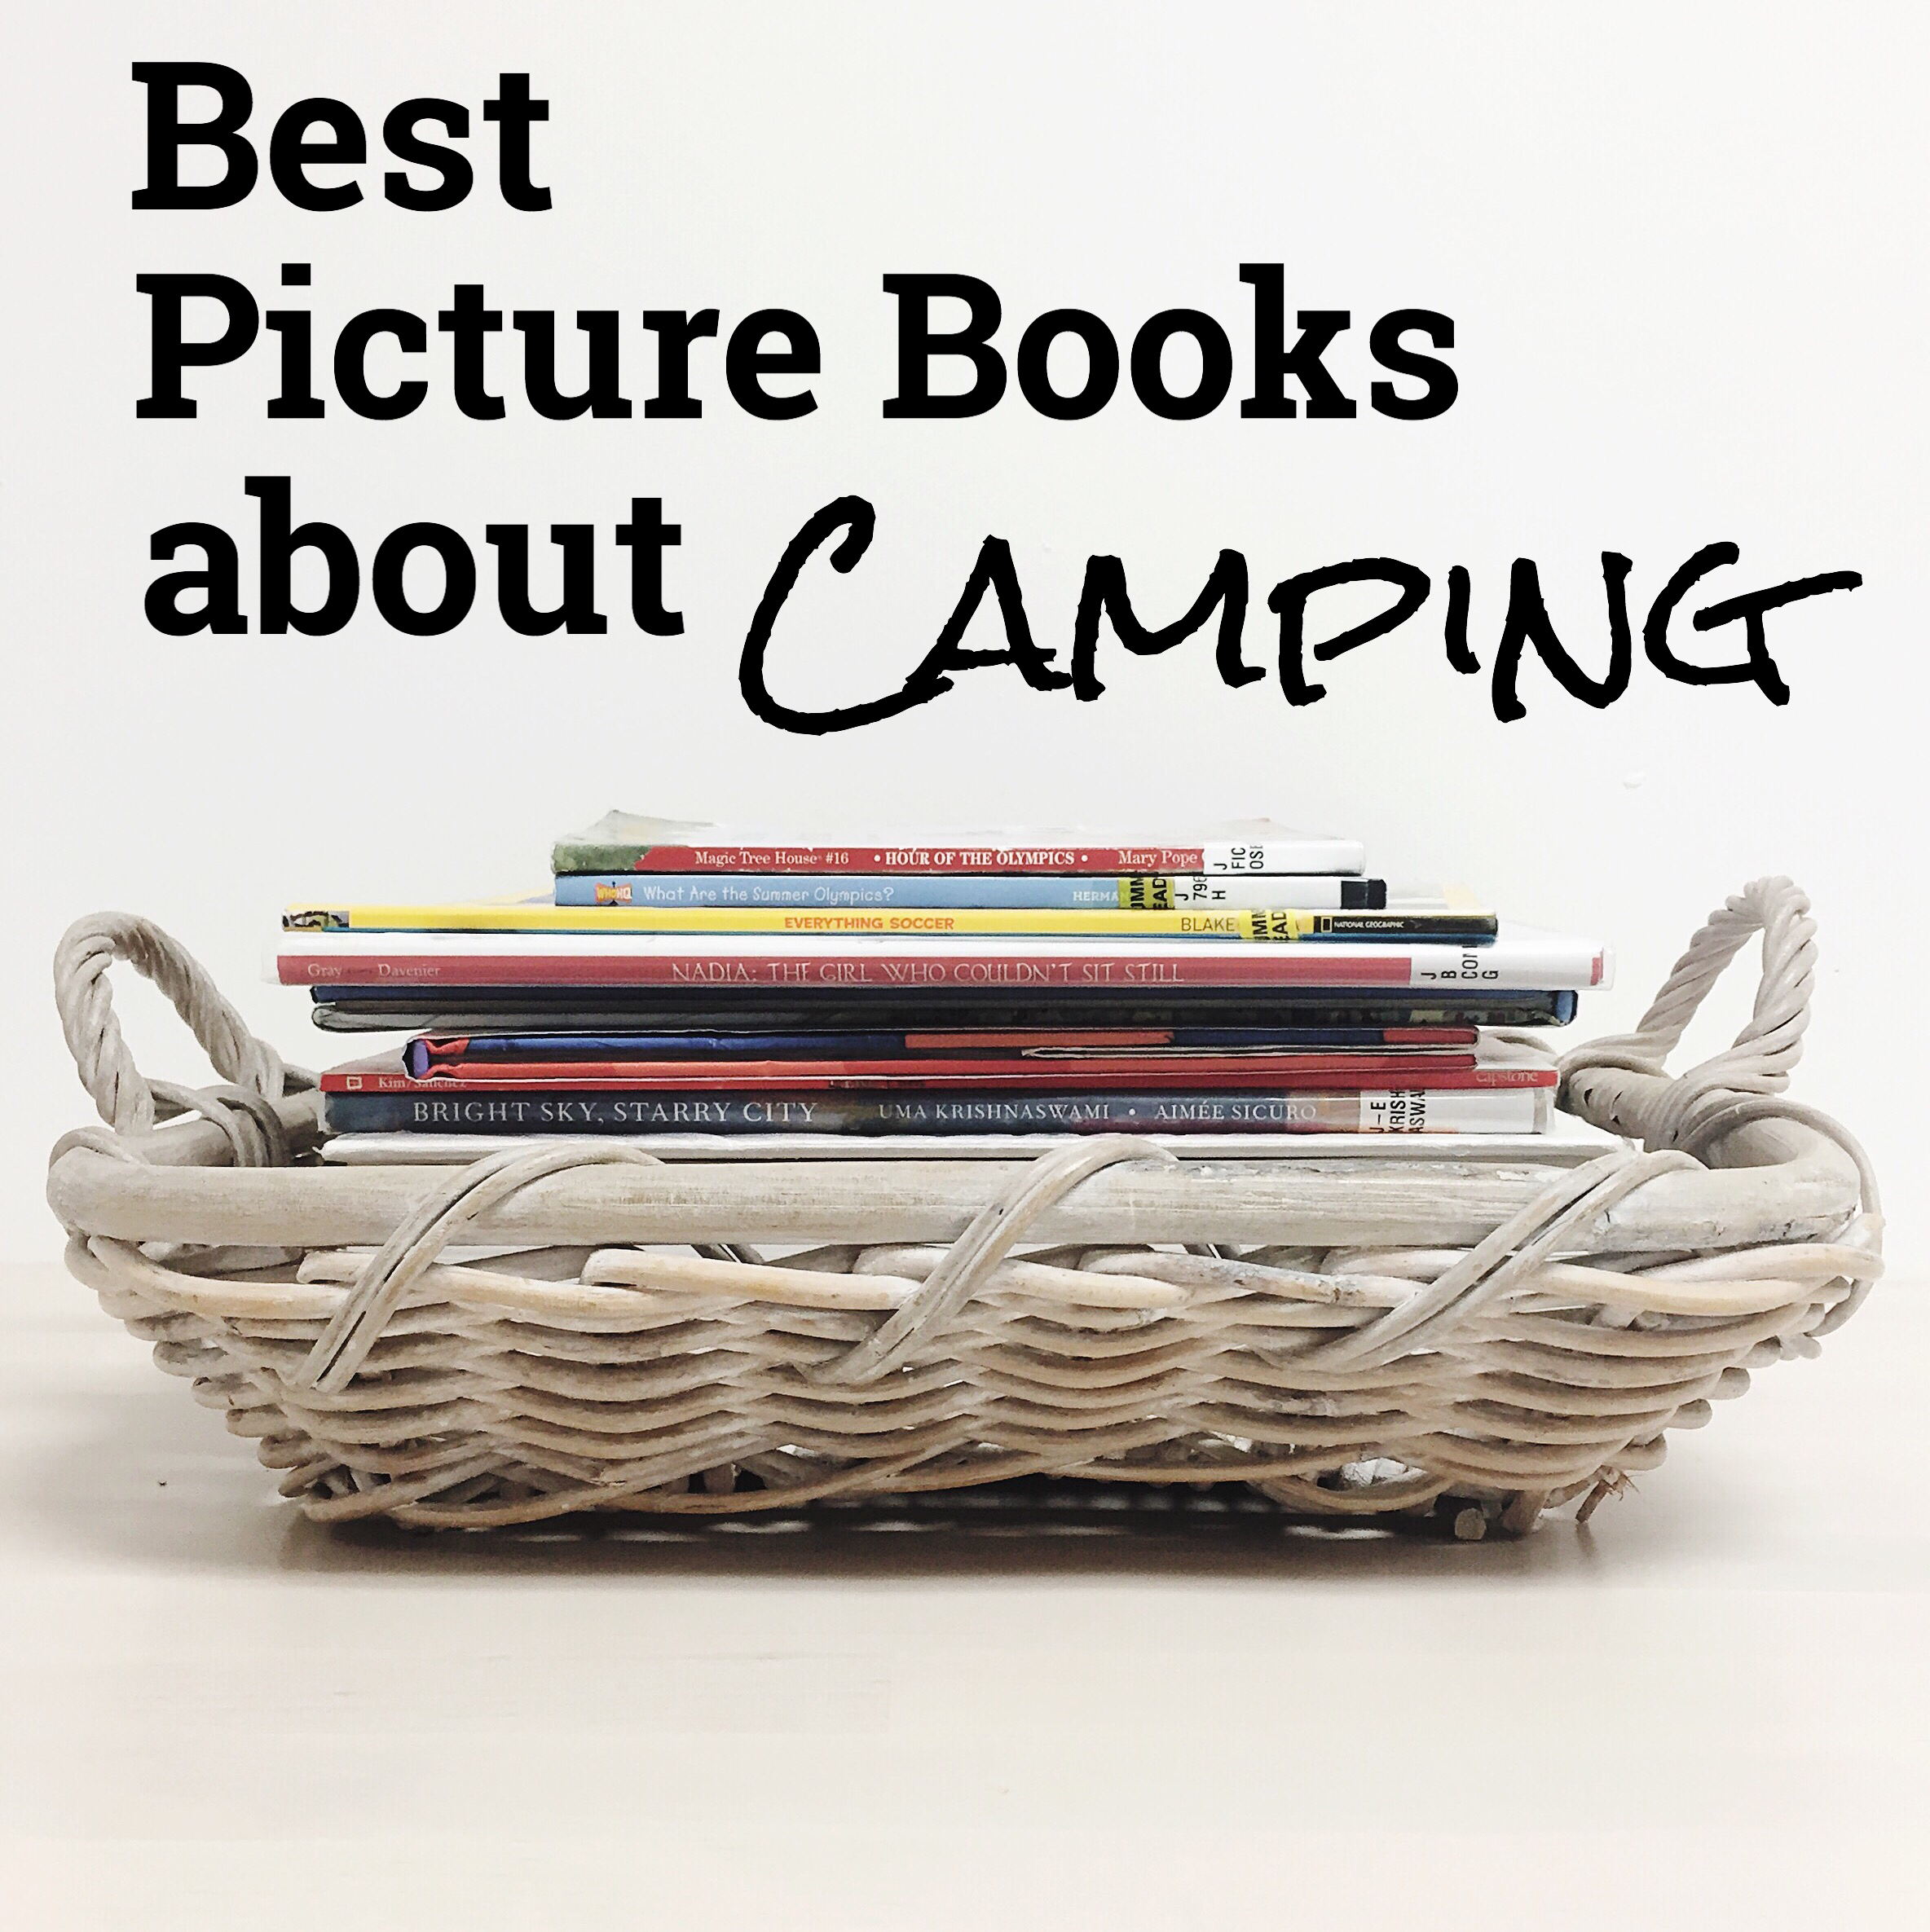 Best Picture Books about Camping